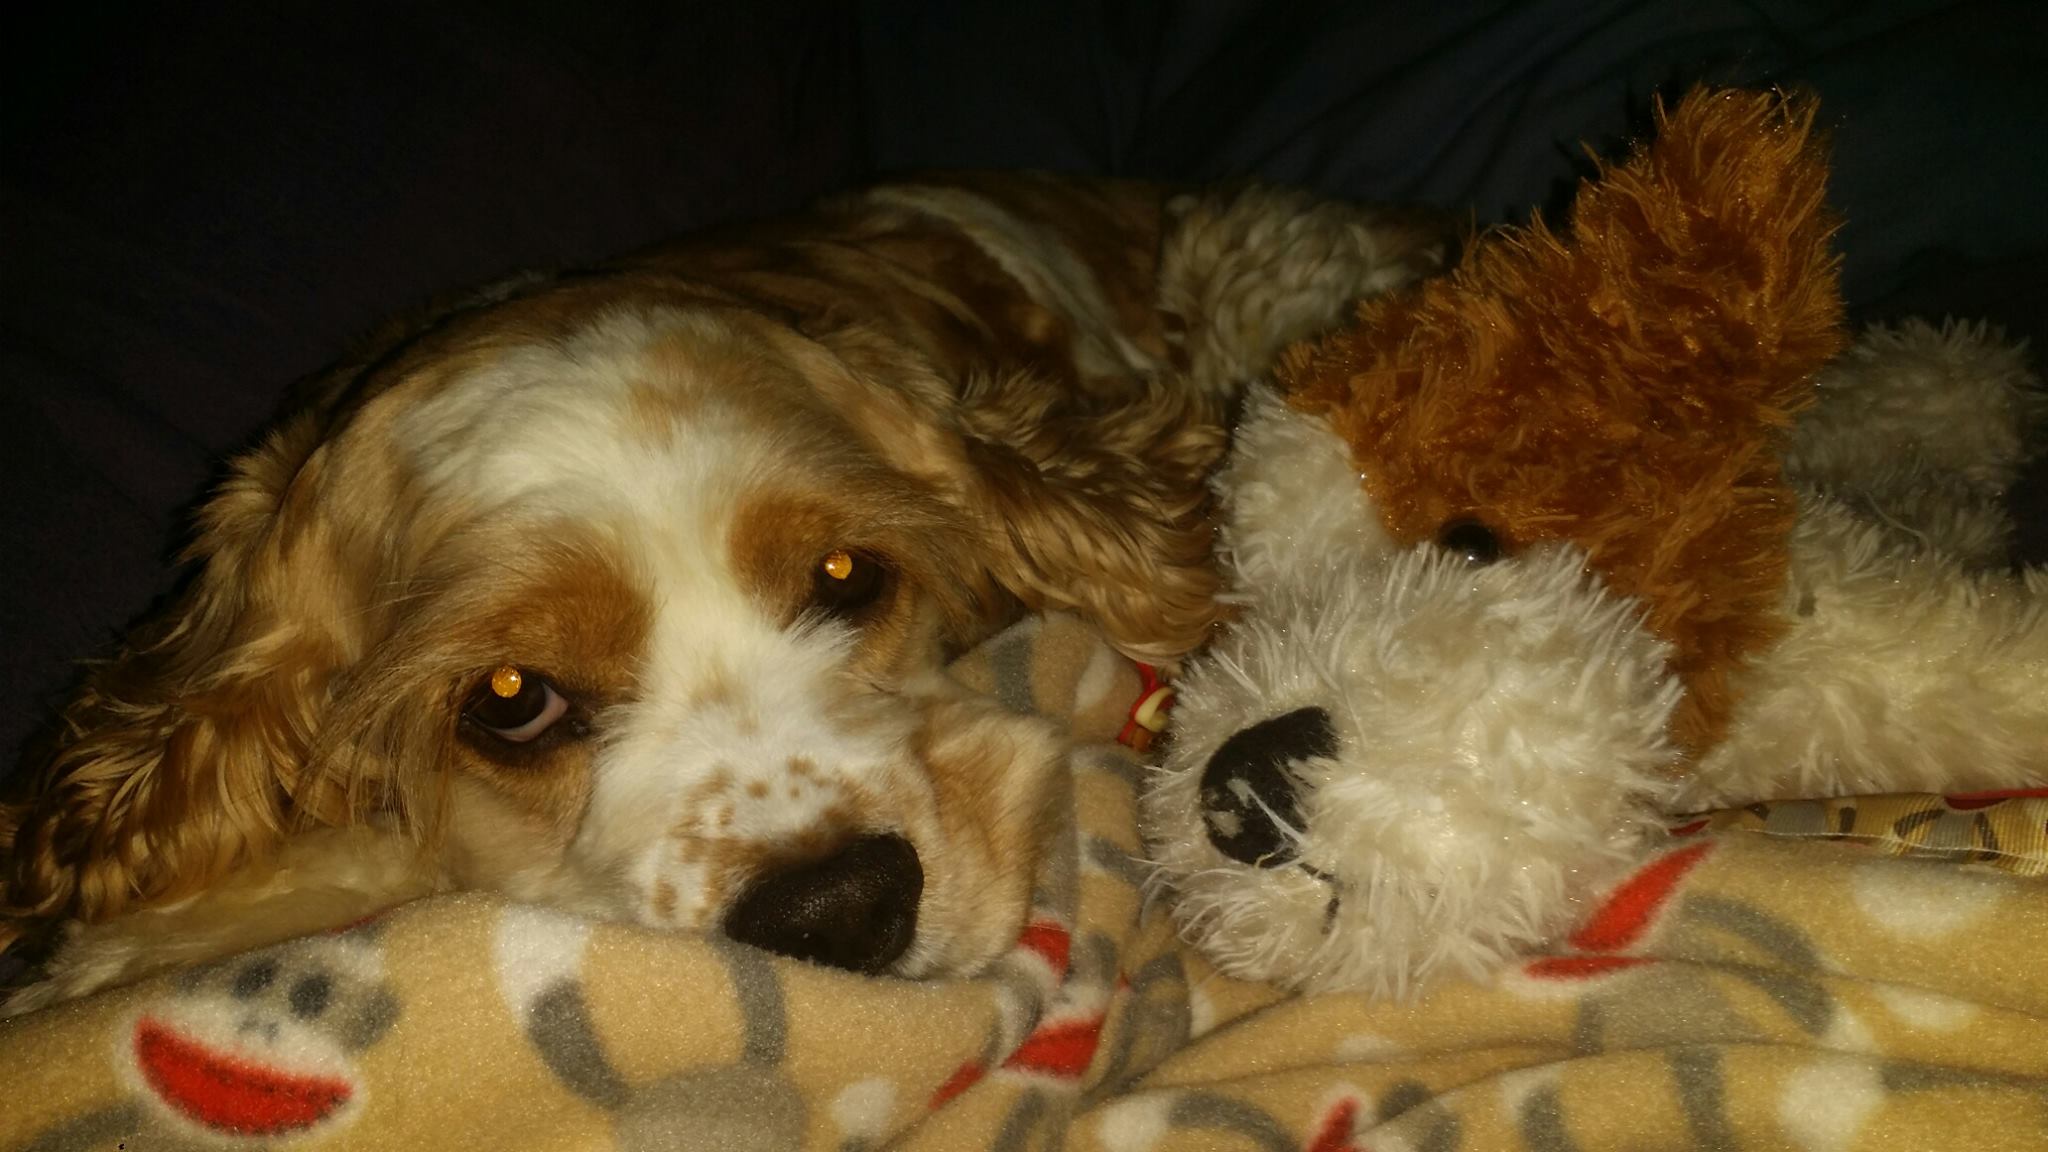 A Cocker Spaniel puppy lying on the bed with its stuffed toy